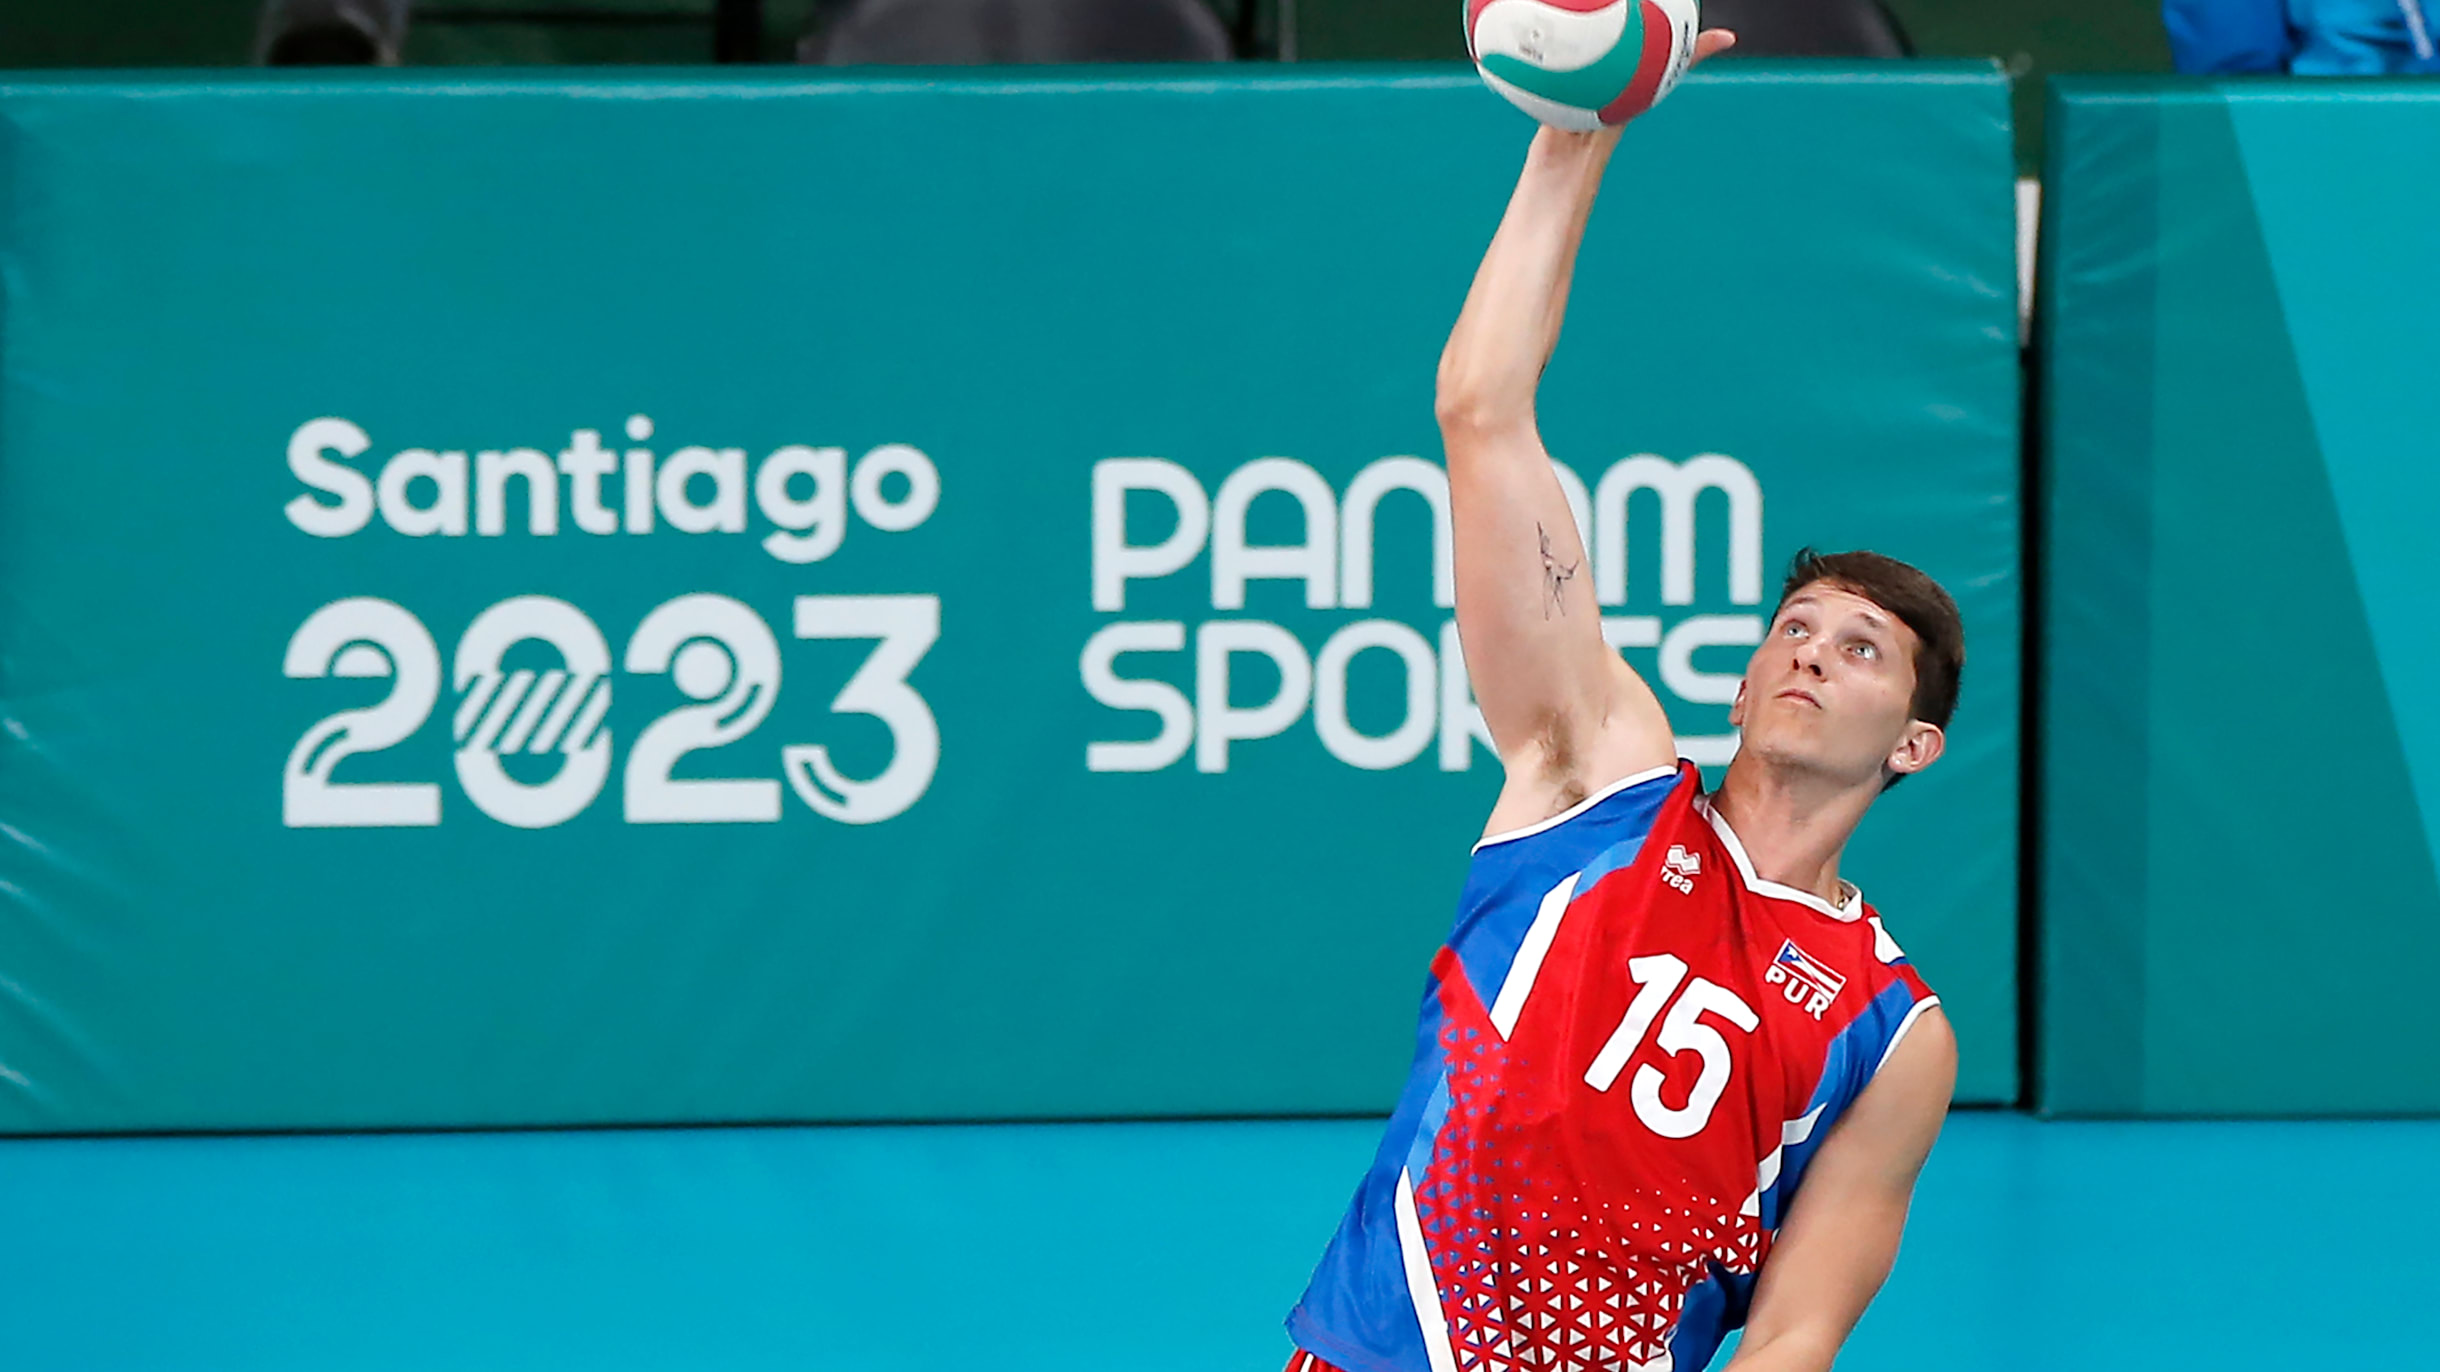 Men's volleyball at the 2023 Pan American Games: All final results and  medals